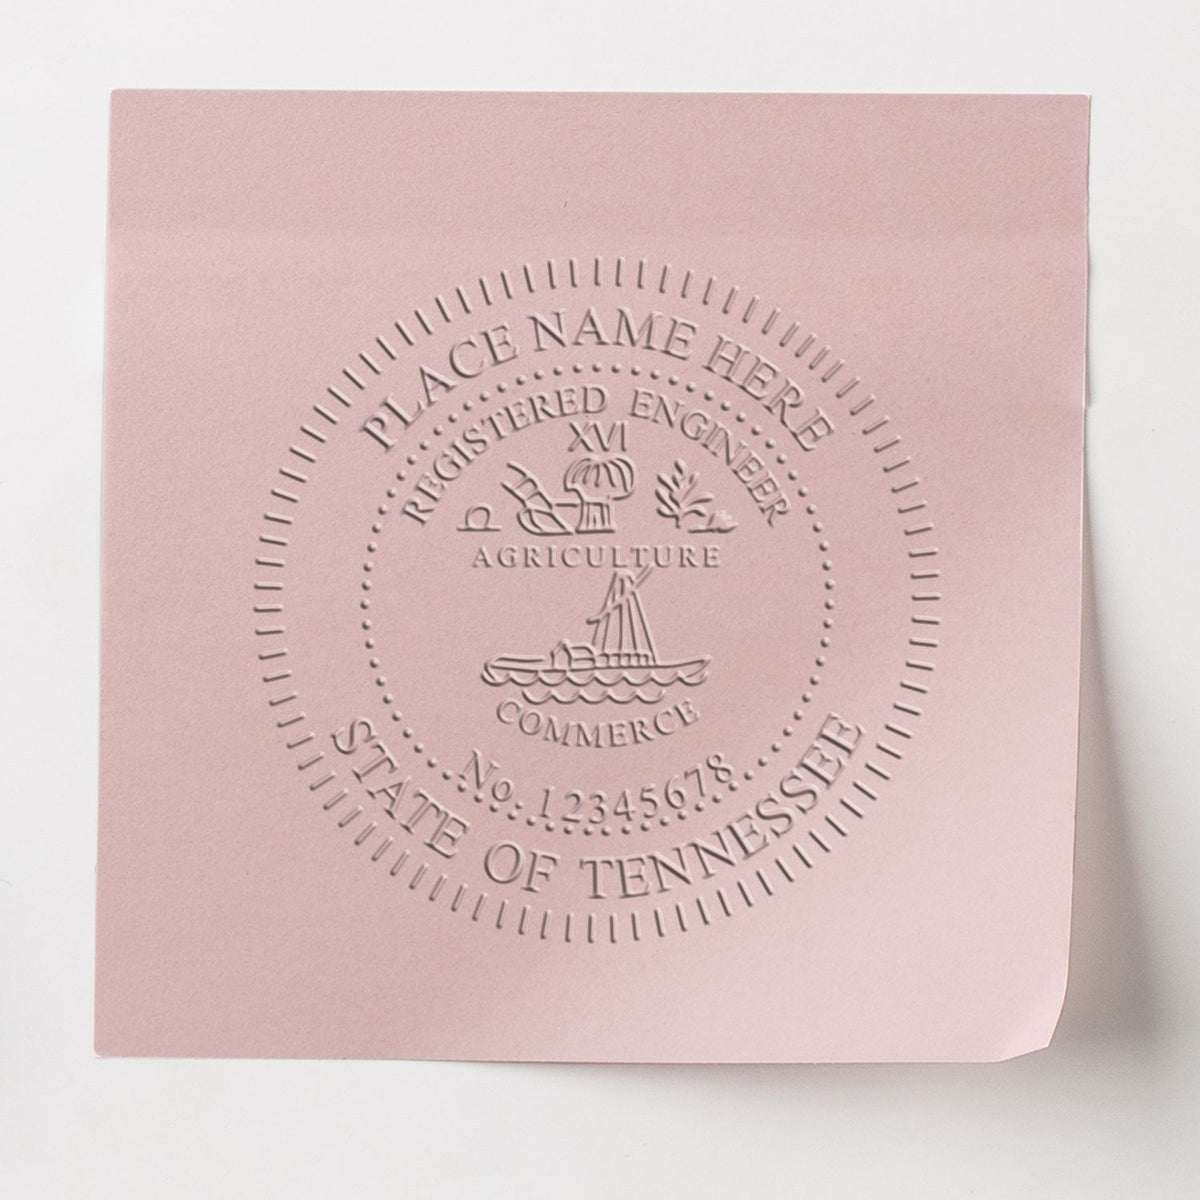 This paper is stamped with a sample imprint of the Soft Tennessee Professional Engineer Seal, signifying its quality and reliability.